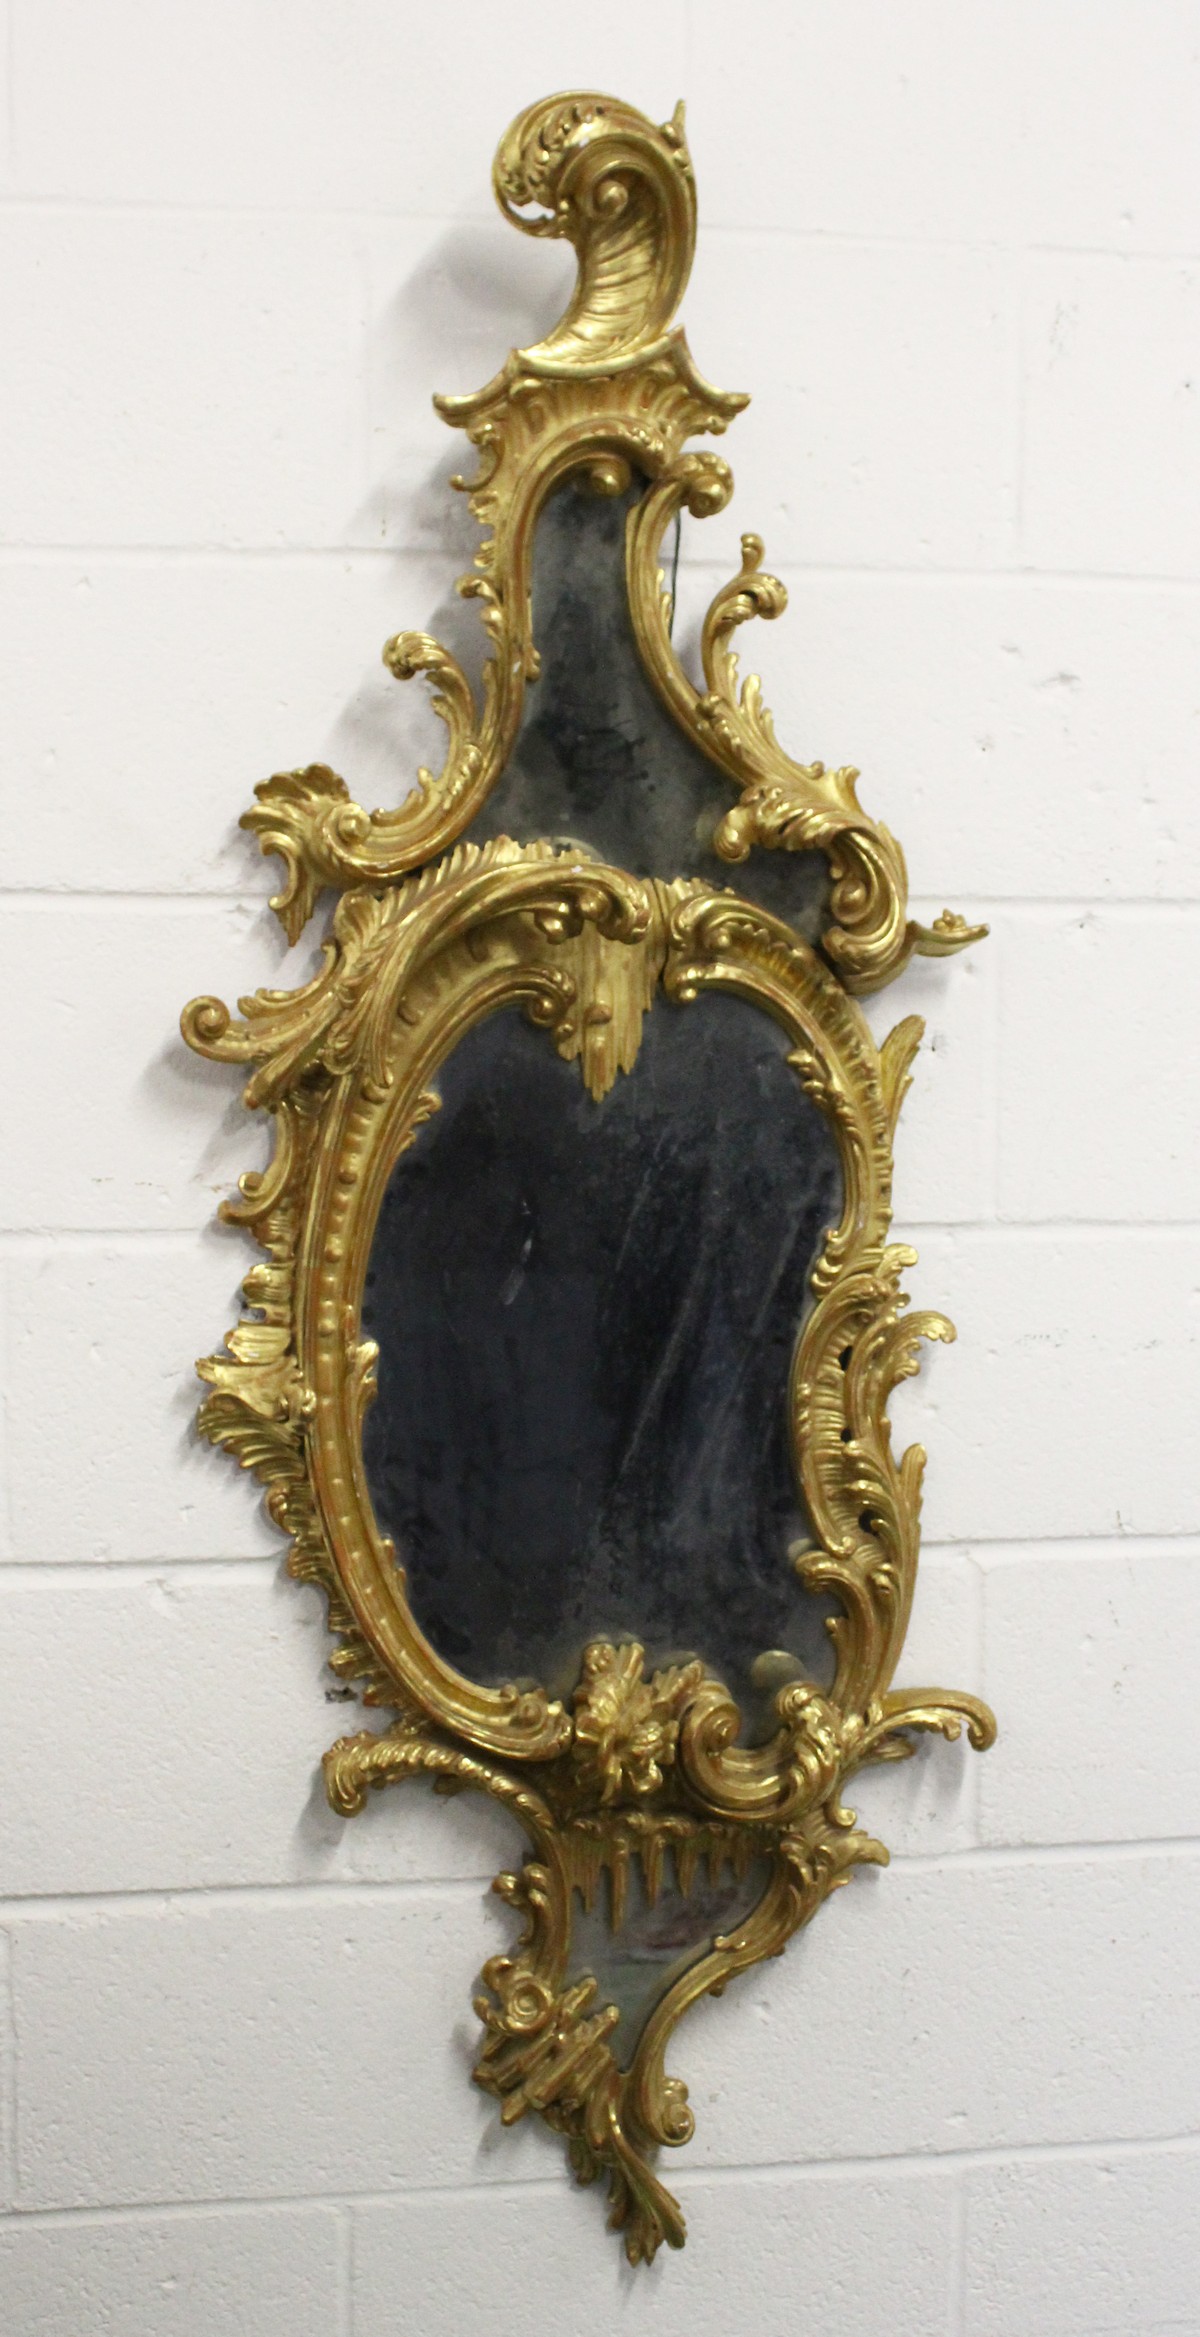 A GOOD CHIPPENDALE CARVED AND GILDED ROCOCO DESIGN MIRROR with scrolls and foliage. 4ft 10ins high x